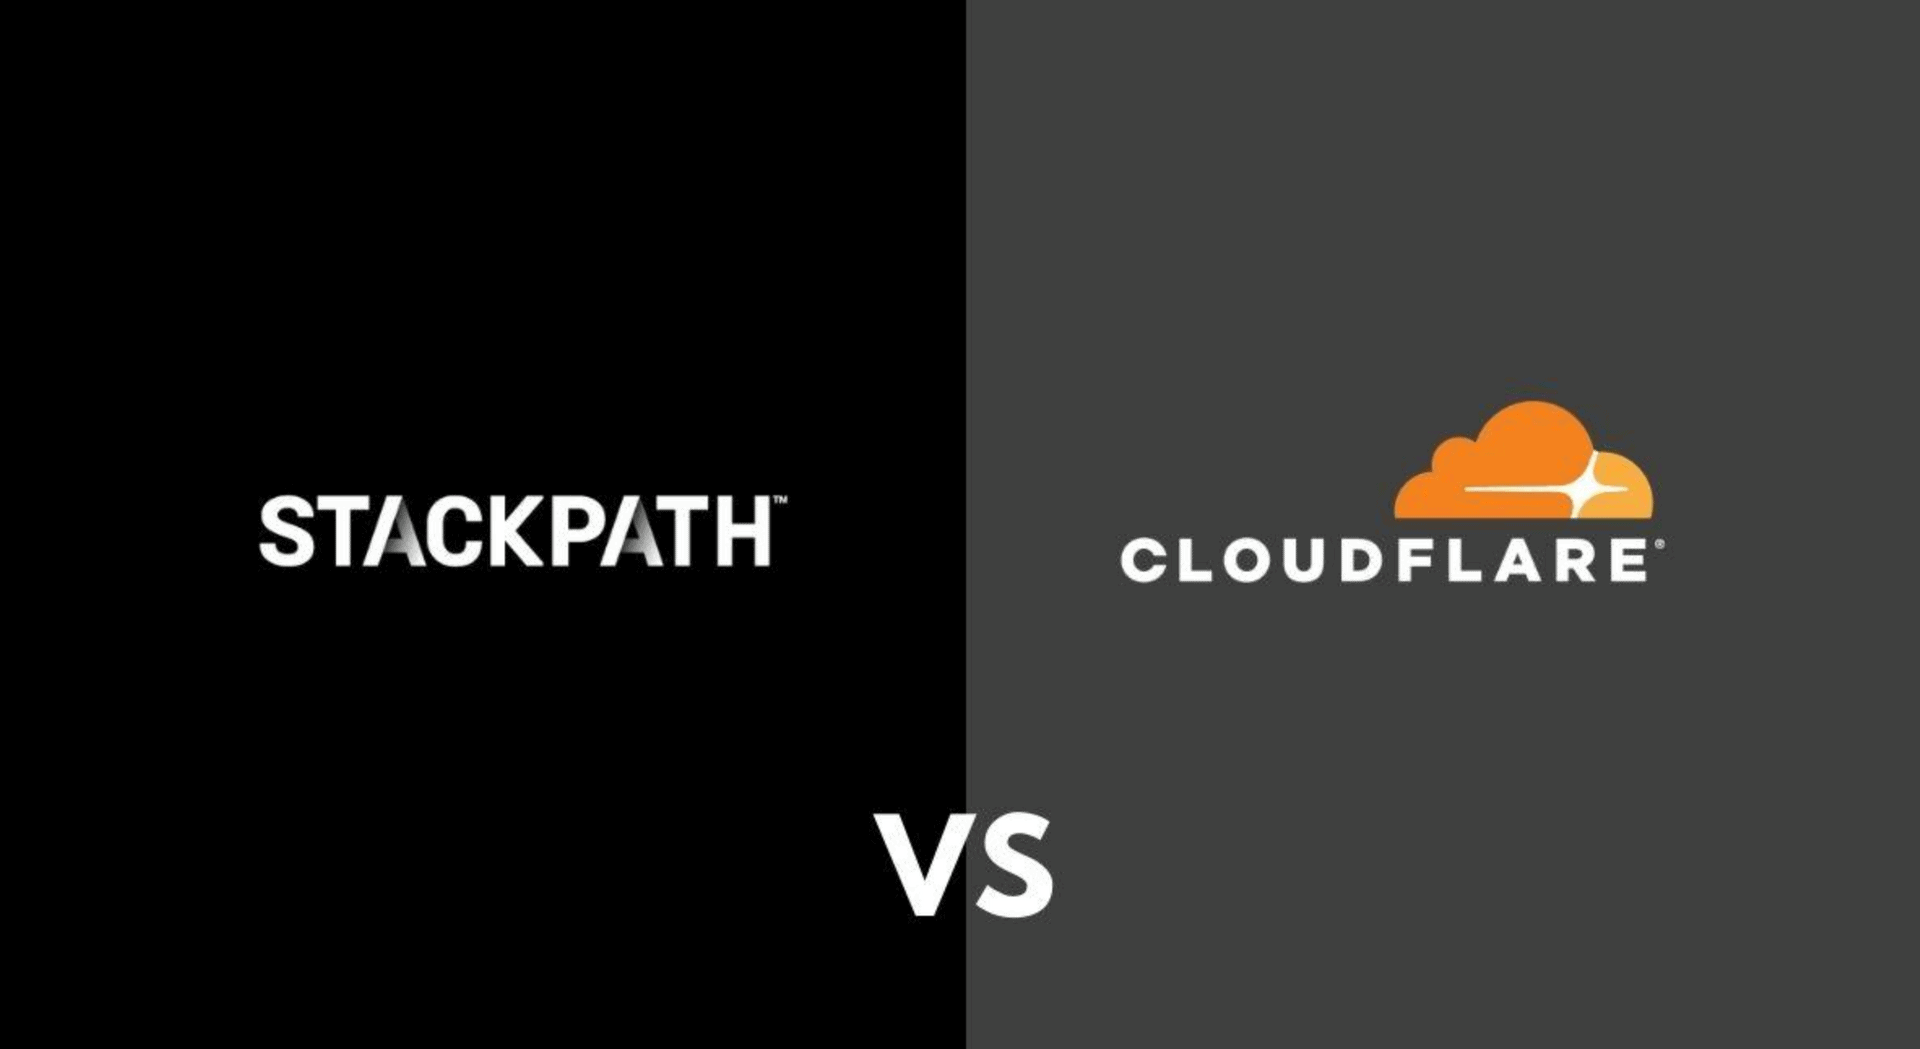 Stackpath vs Cloudflare